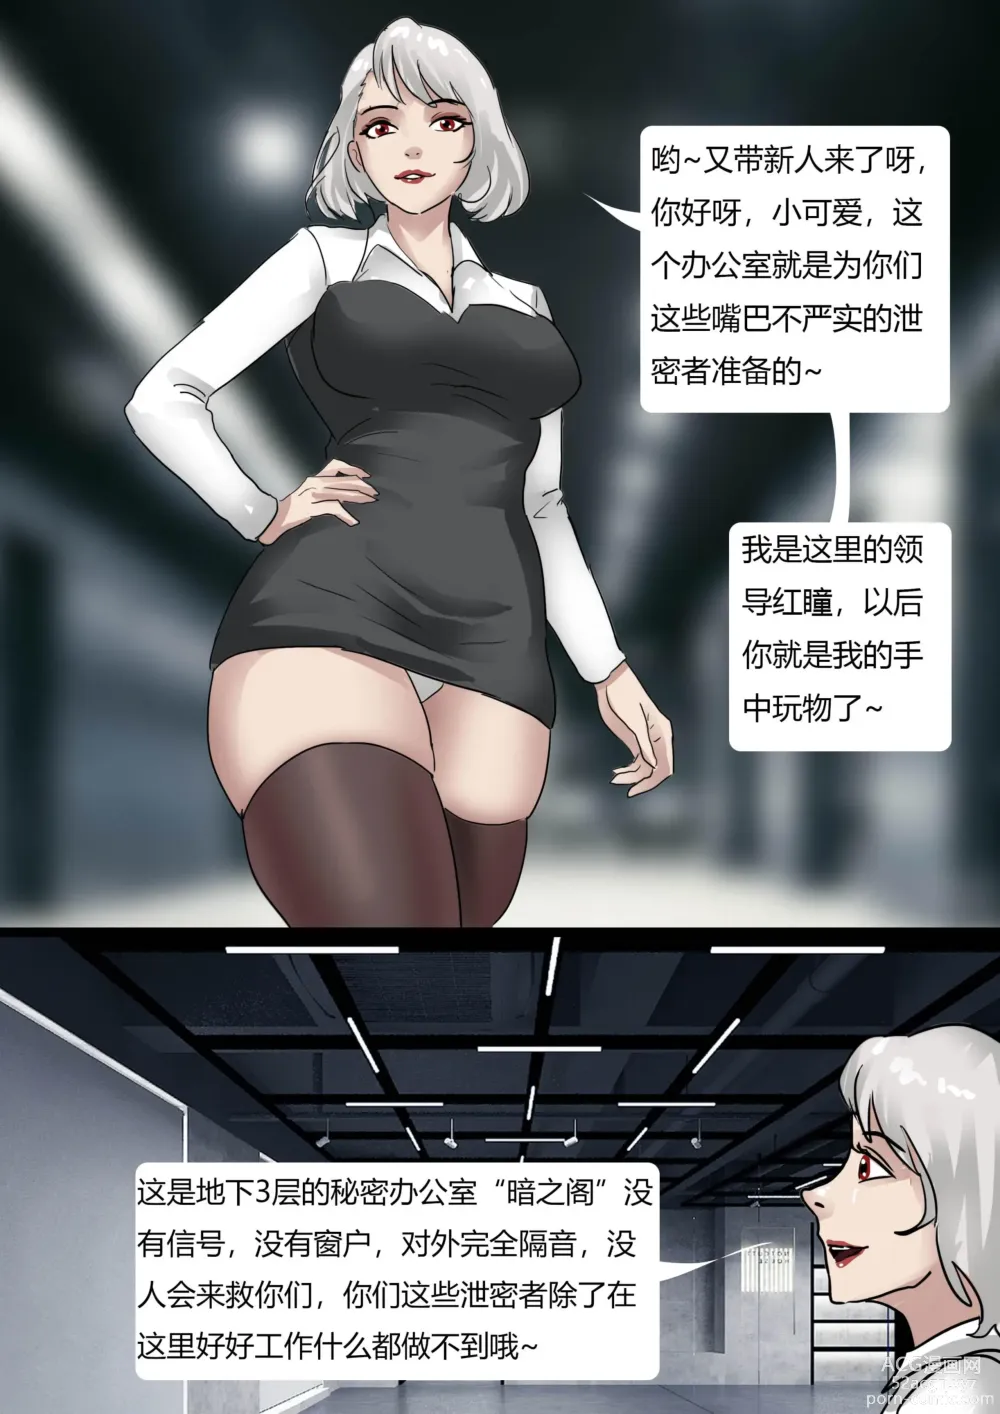 Page 4 of doujinshi The Bondage Office 02